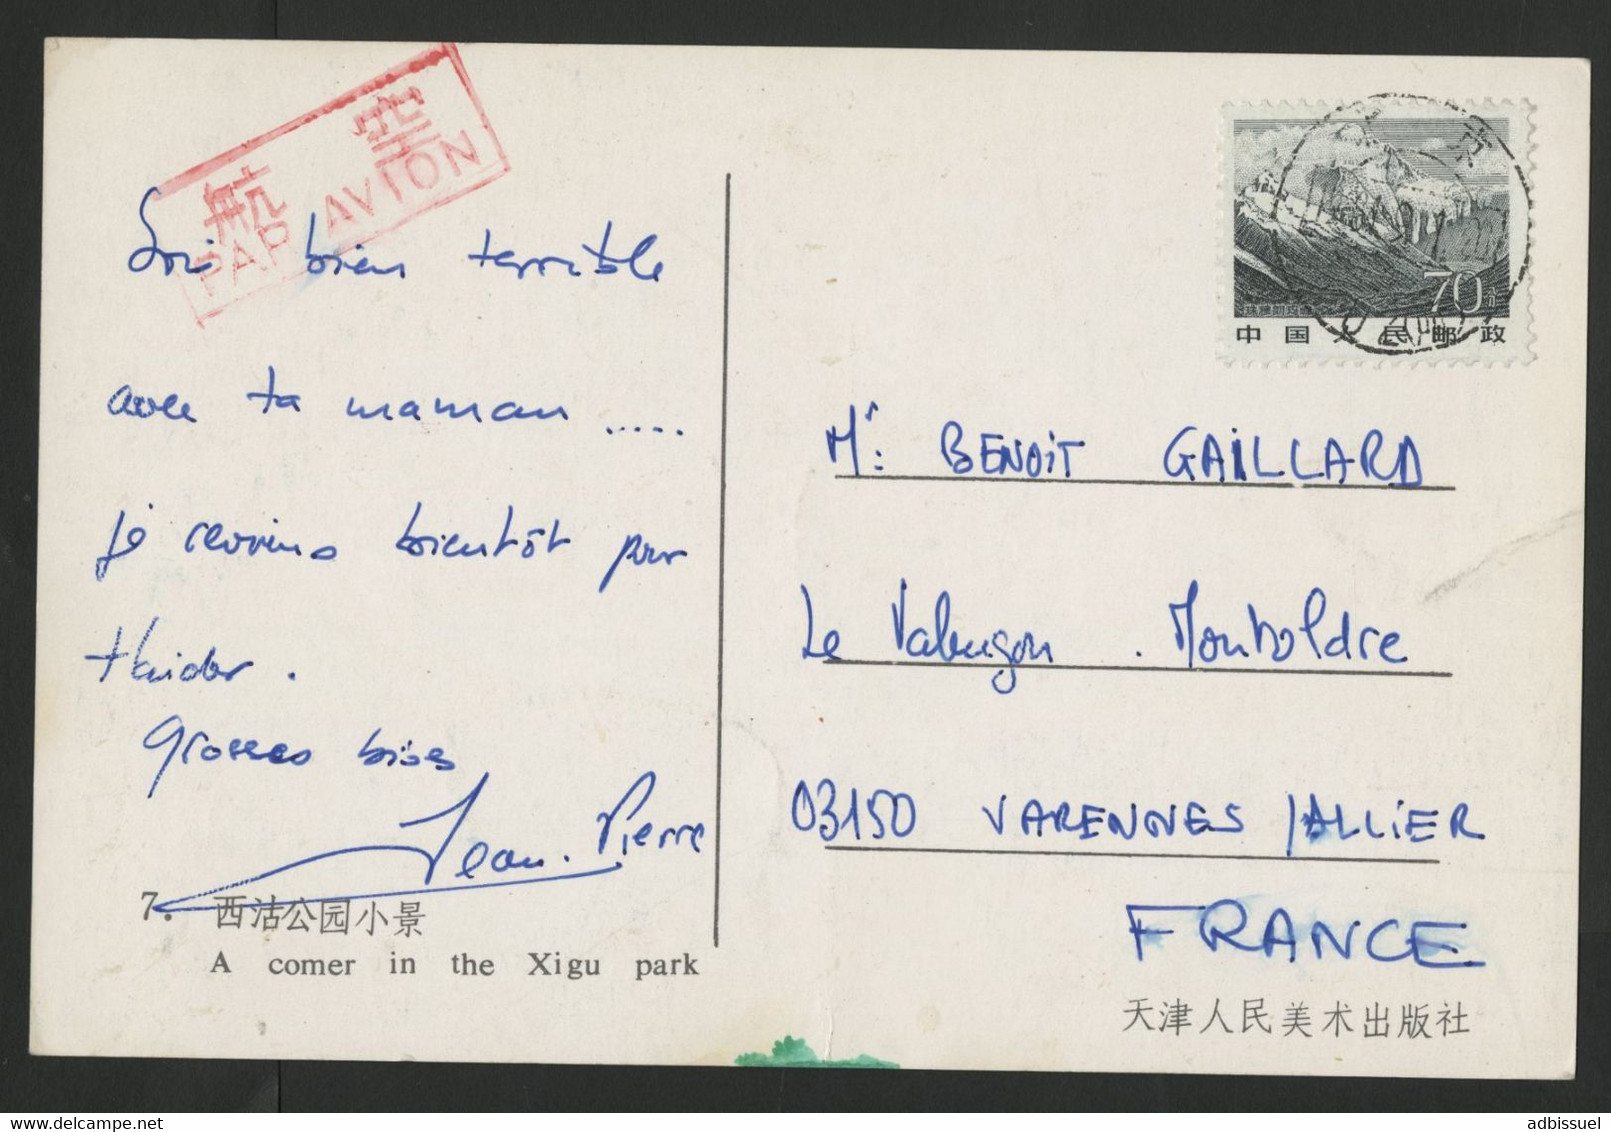 CHINA N° 2588 Zhumulangma / Everest On A Postcard By Airmail To France. - Briefe U. Dokumente